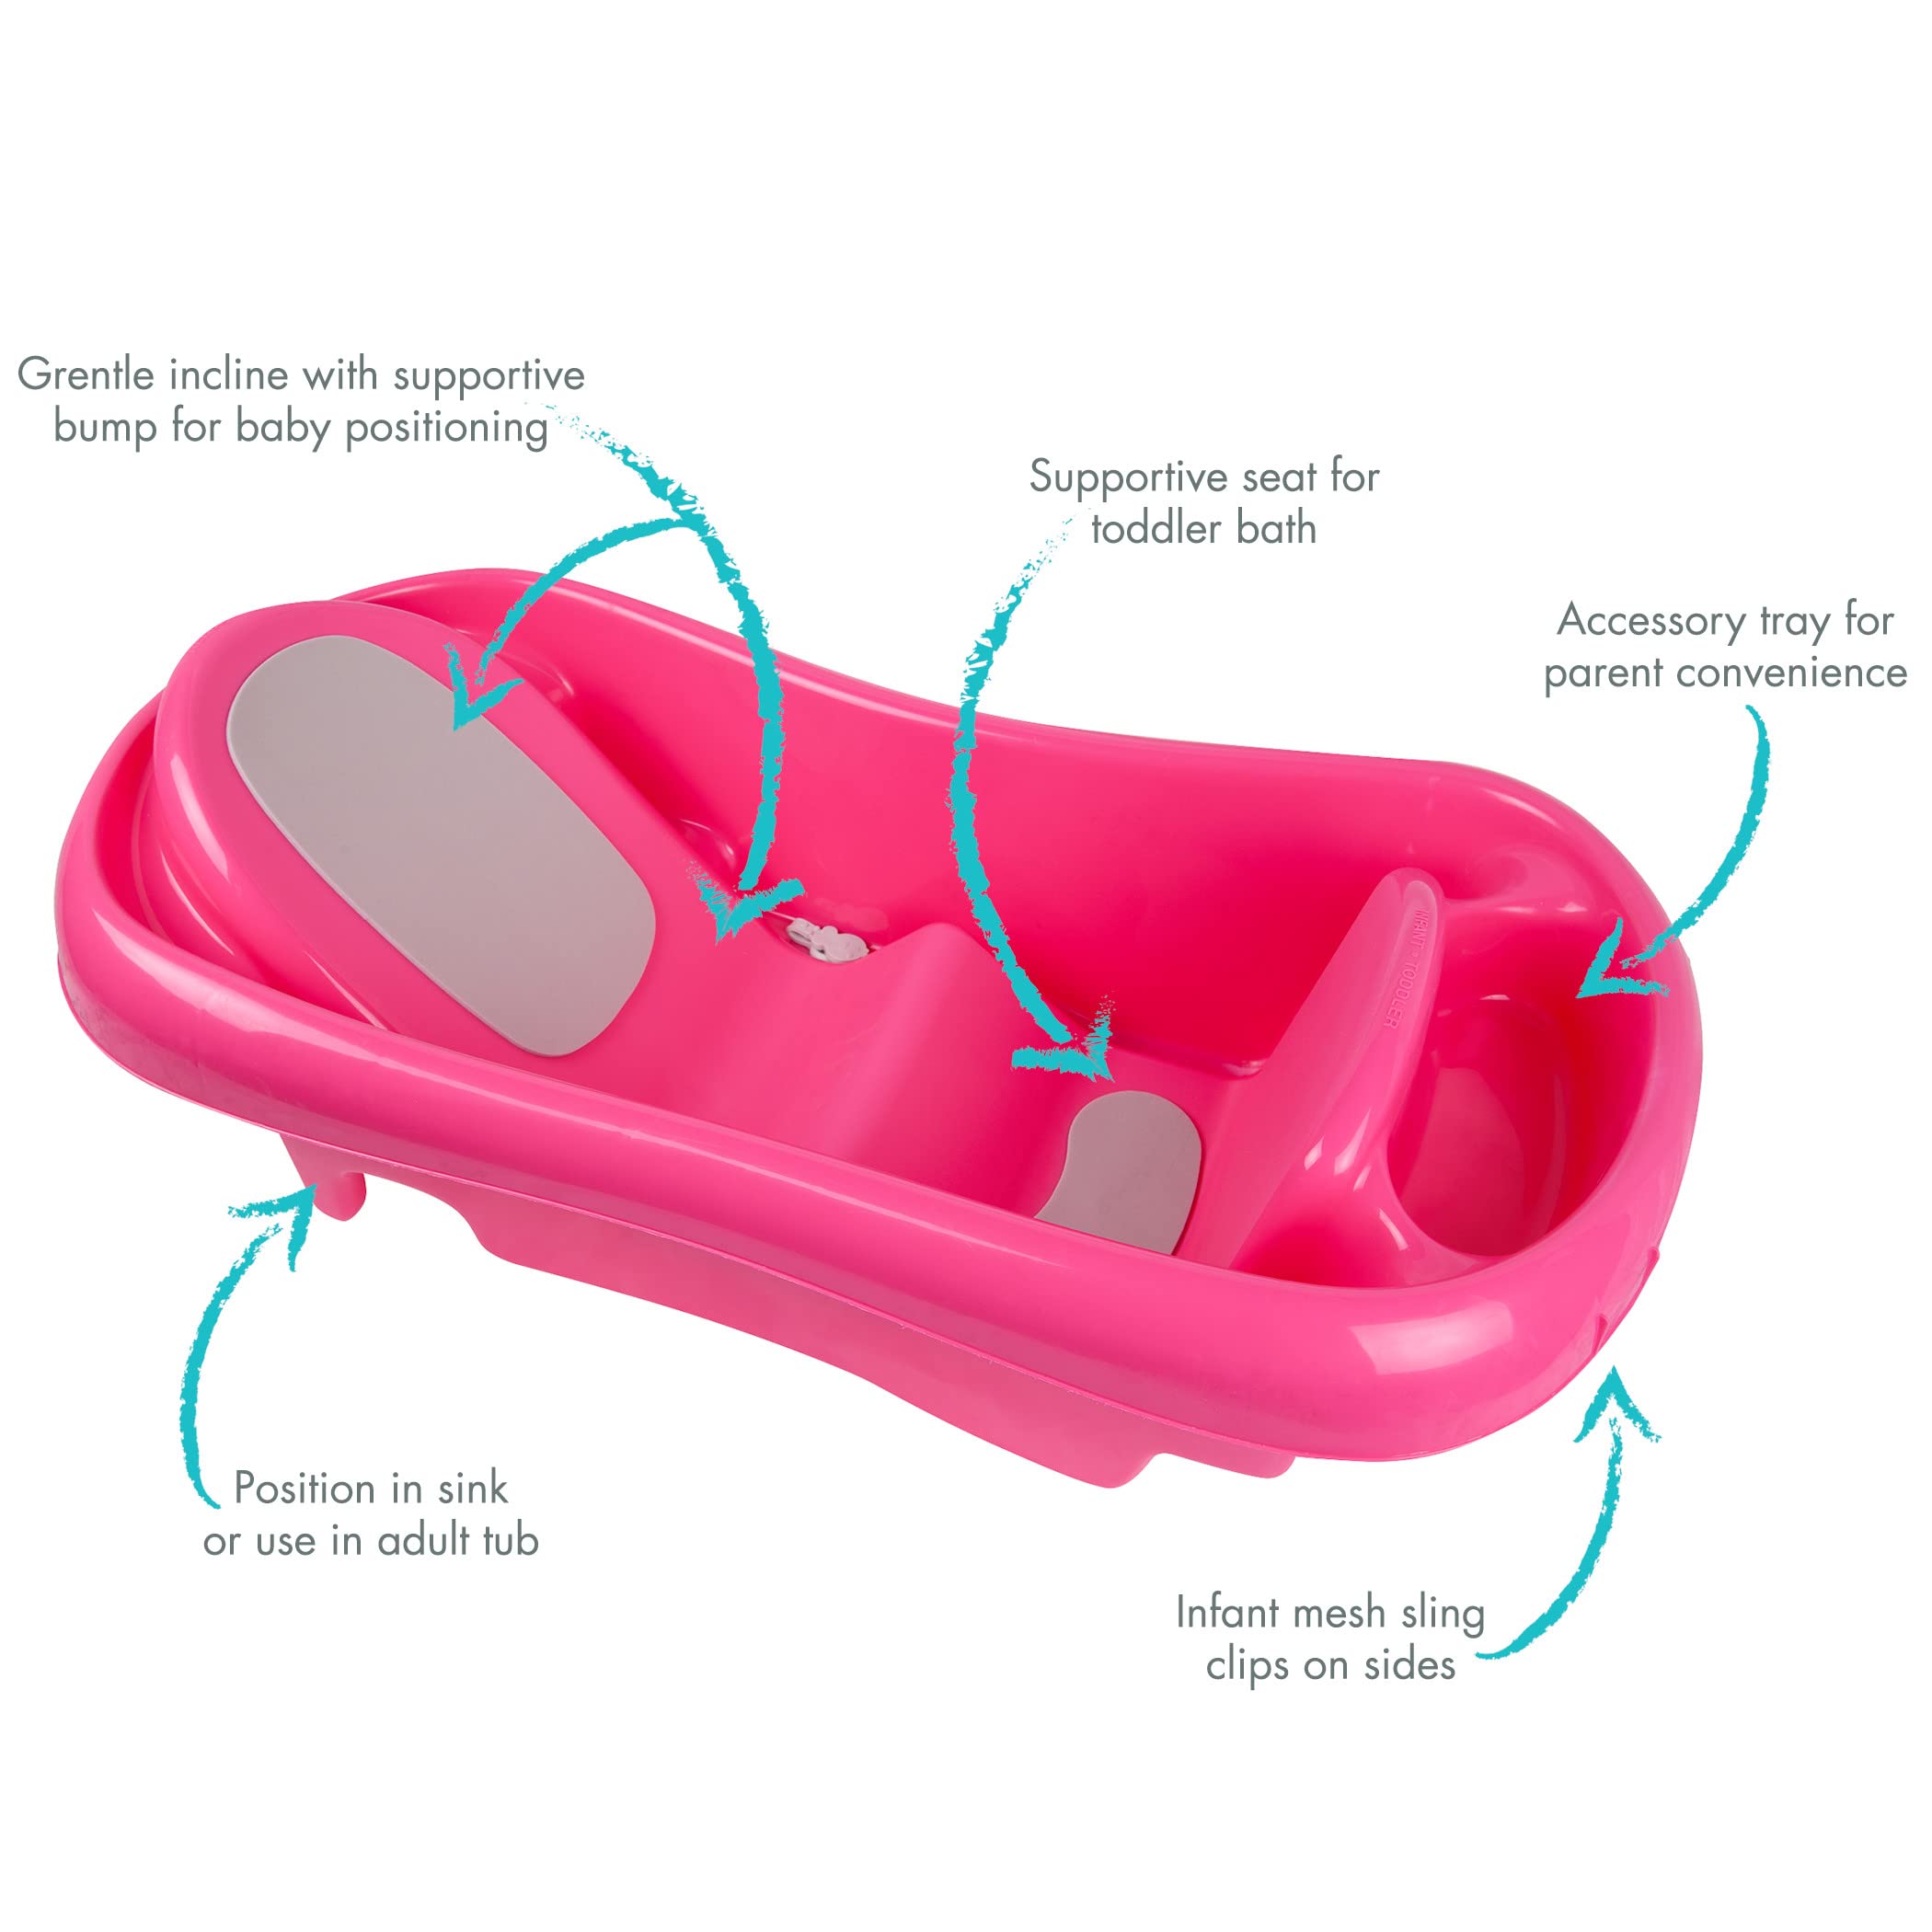 The First Years Adjustable 3-in-1 Baby Bath Tub - Convertible Baby Bath Seat for Infants to Toddlers - Includes Detachable Infant Bath Sling - Pink - Ages 0 to 9 Months